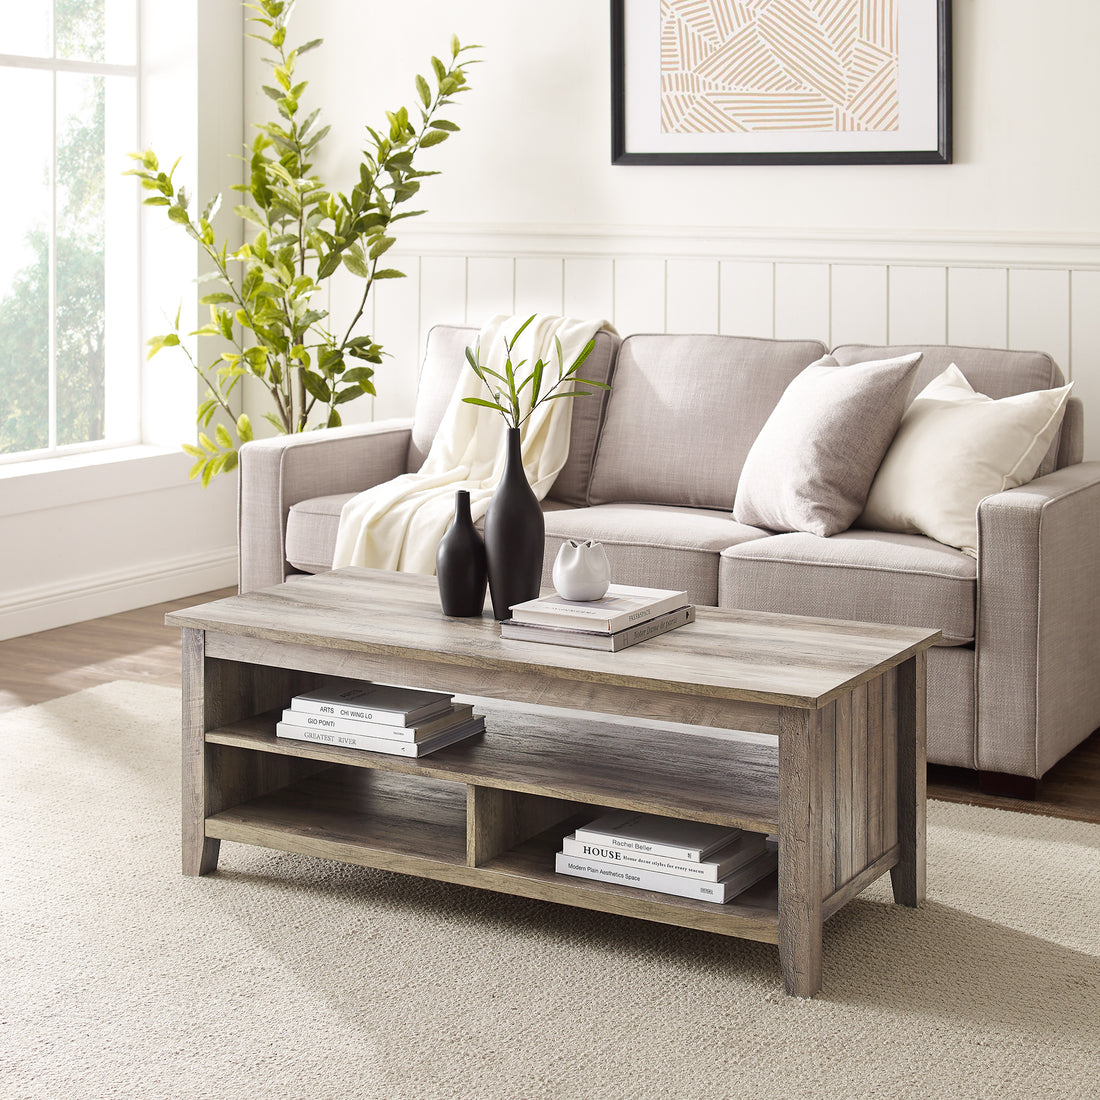 Coastal Grooved Panel Coffee Table With Lower